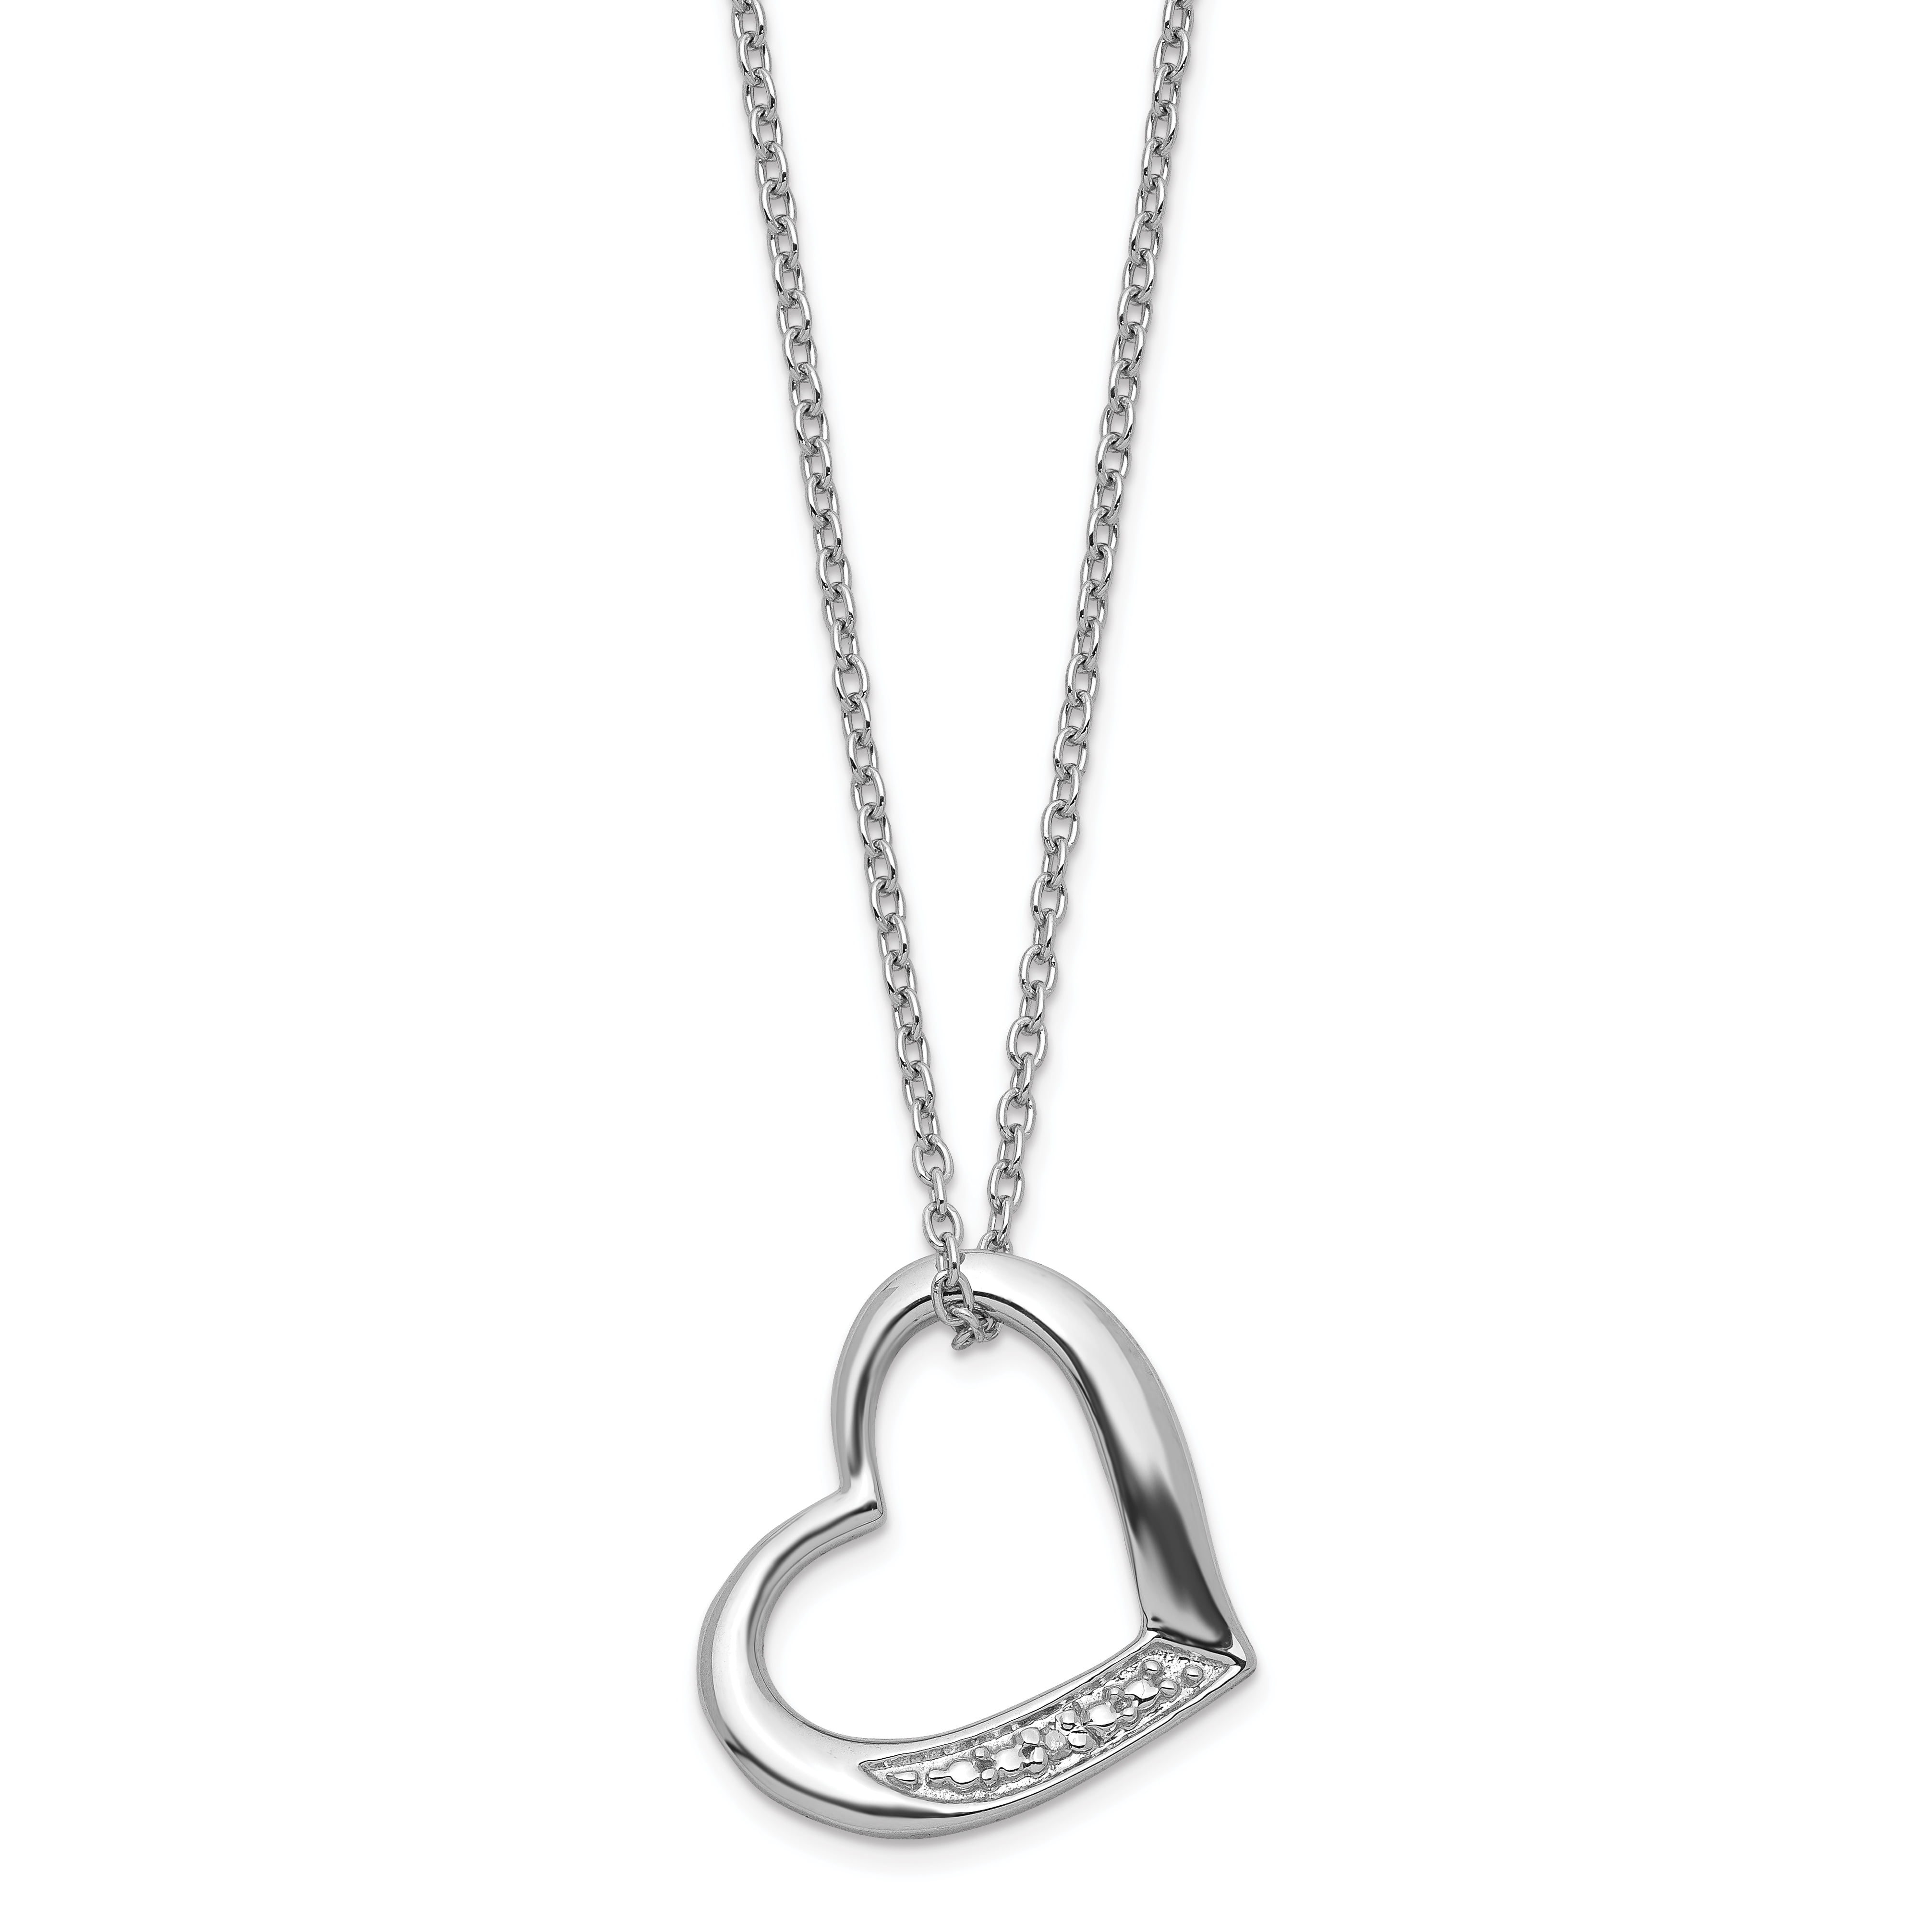 Leaf Charm 925 Sterling Silver Box Chain Necklace Women New Pendant Her Gift UK 